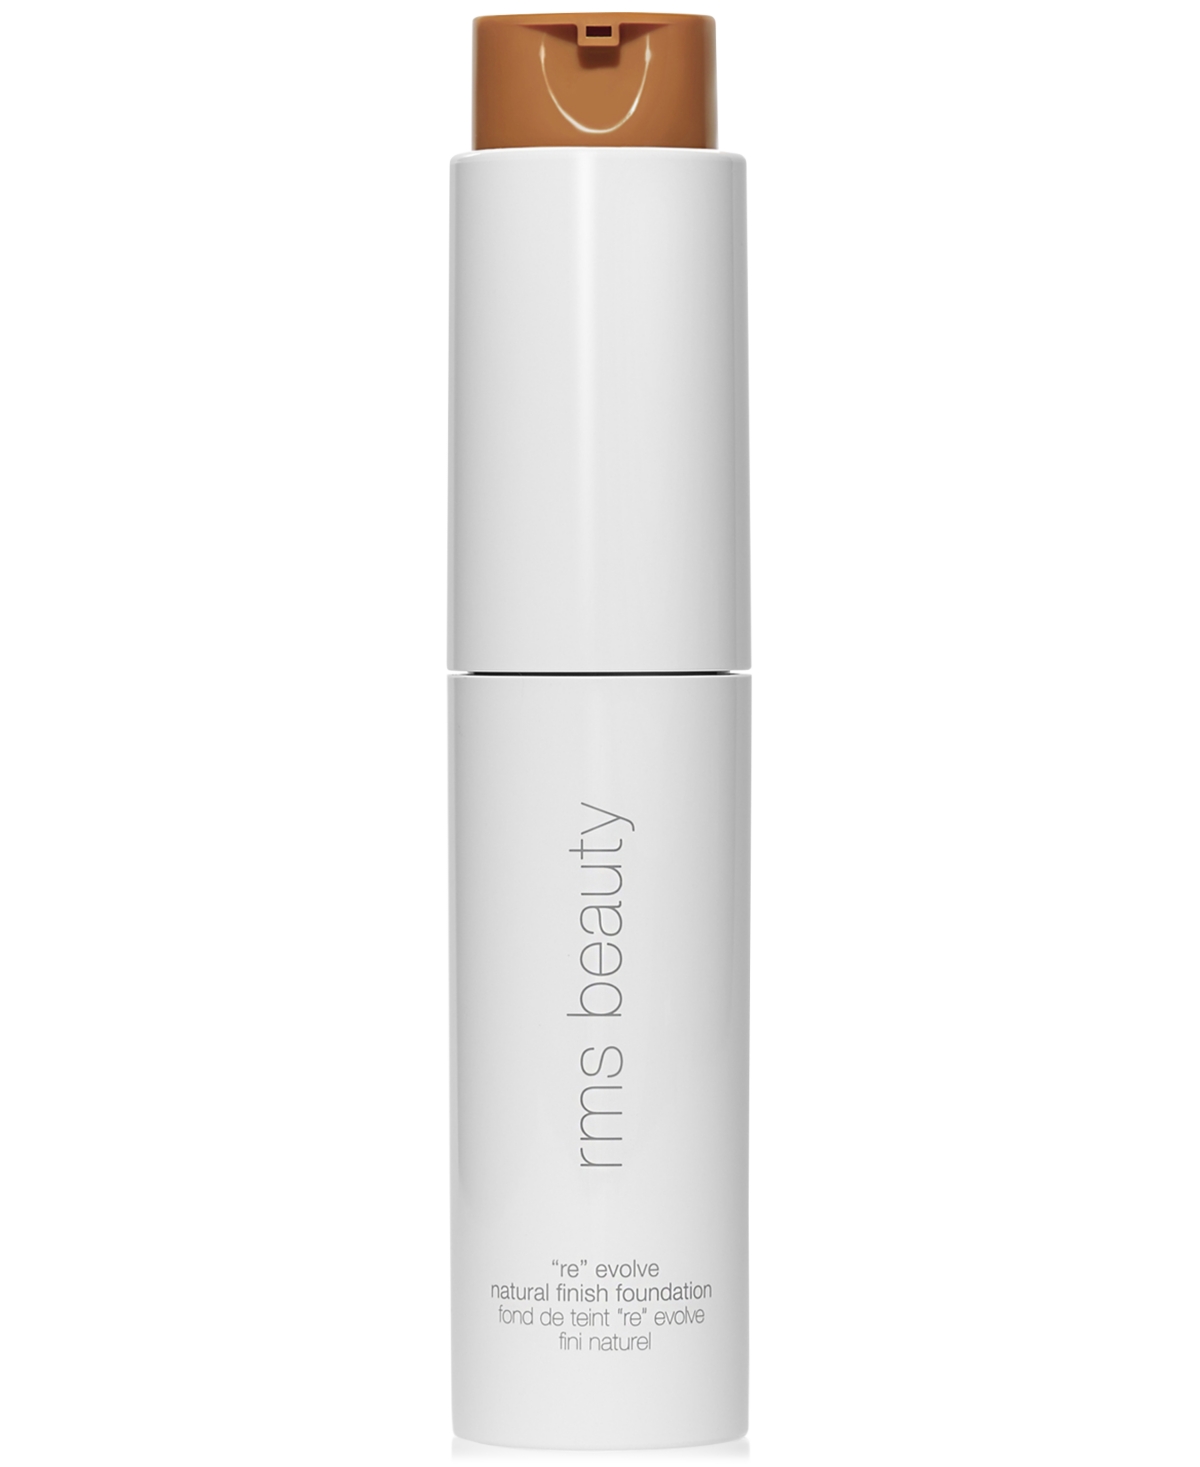 Rms Beauty Reevolve Natural Finish Foundation In Rich Auburn